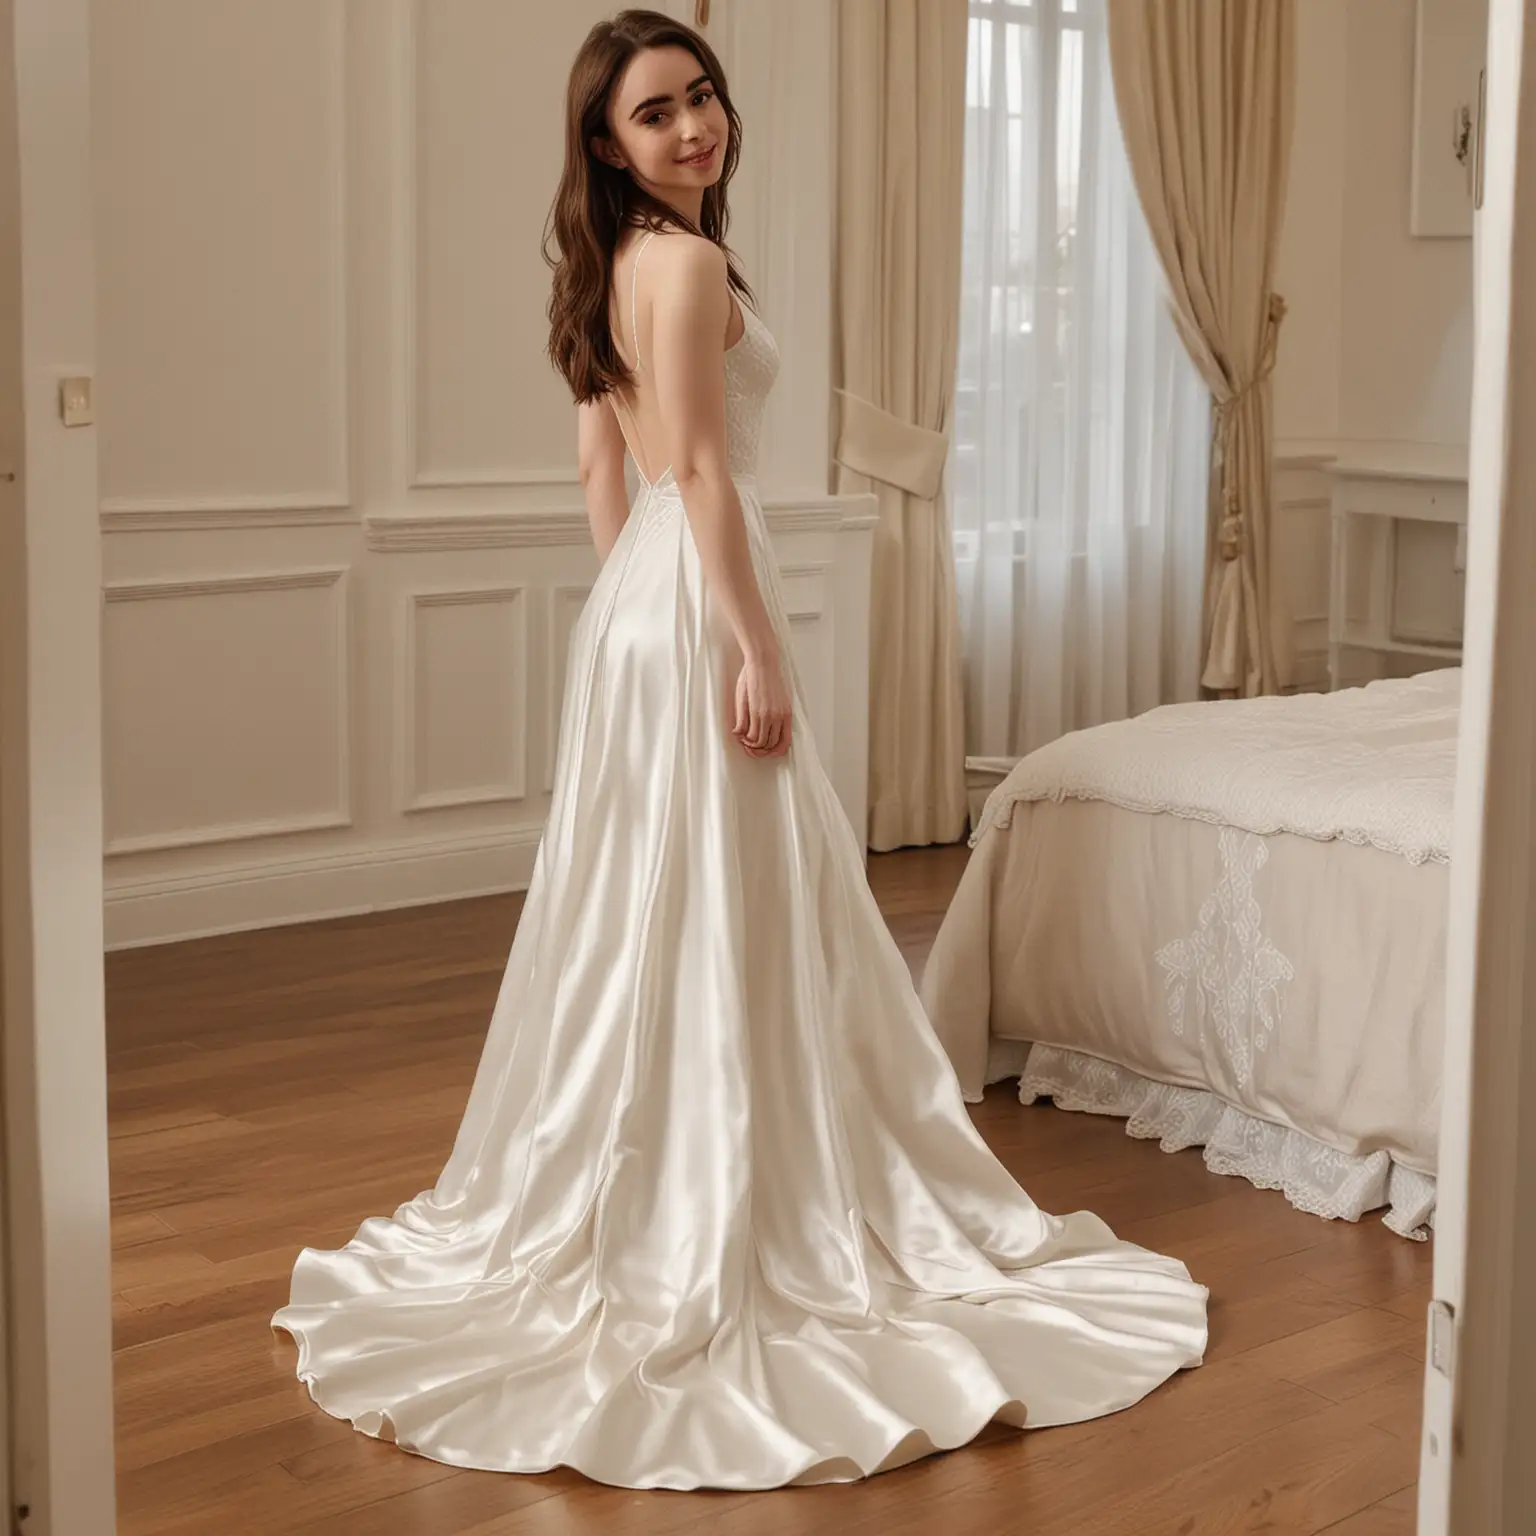 Lily Collins in Elegant Ivory Satin Princess Gown